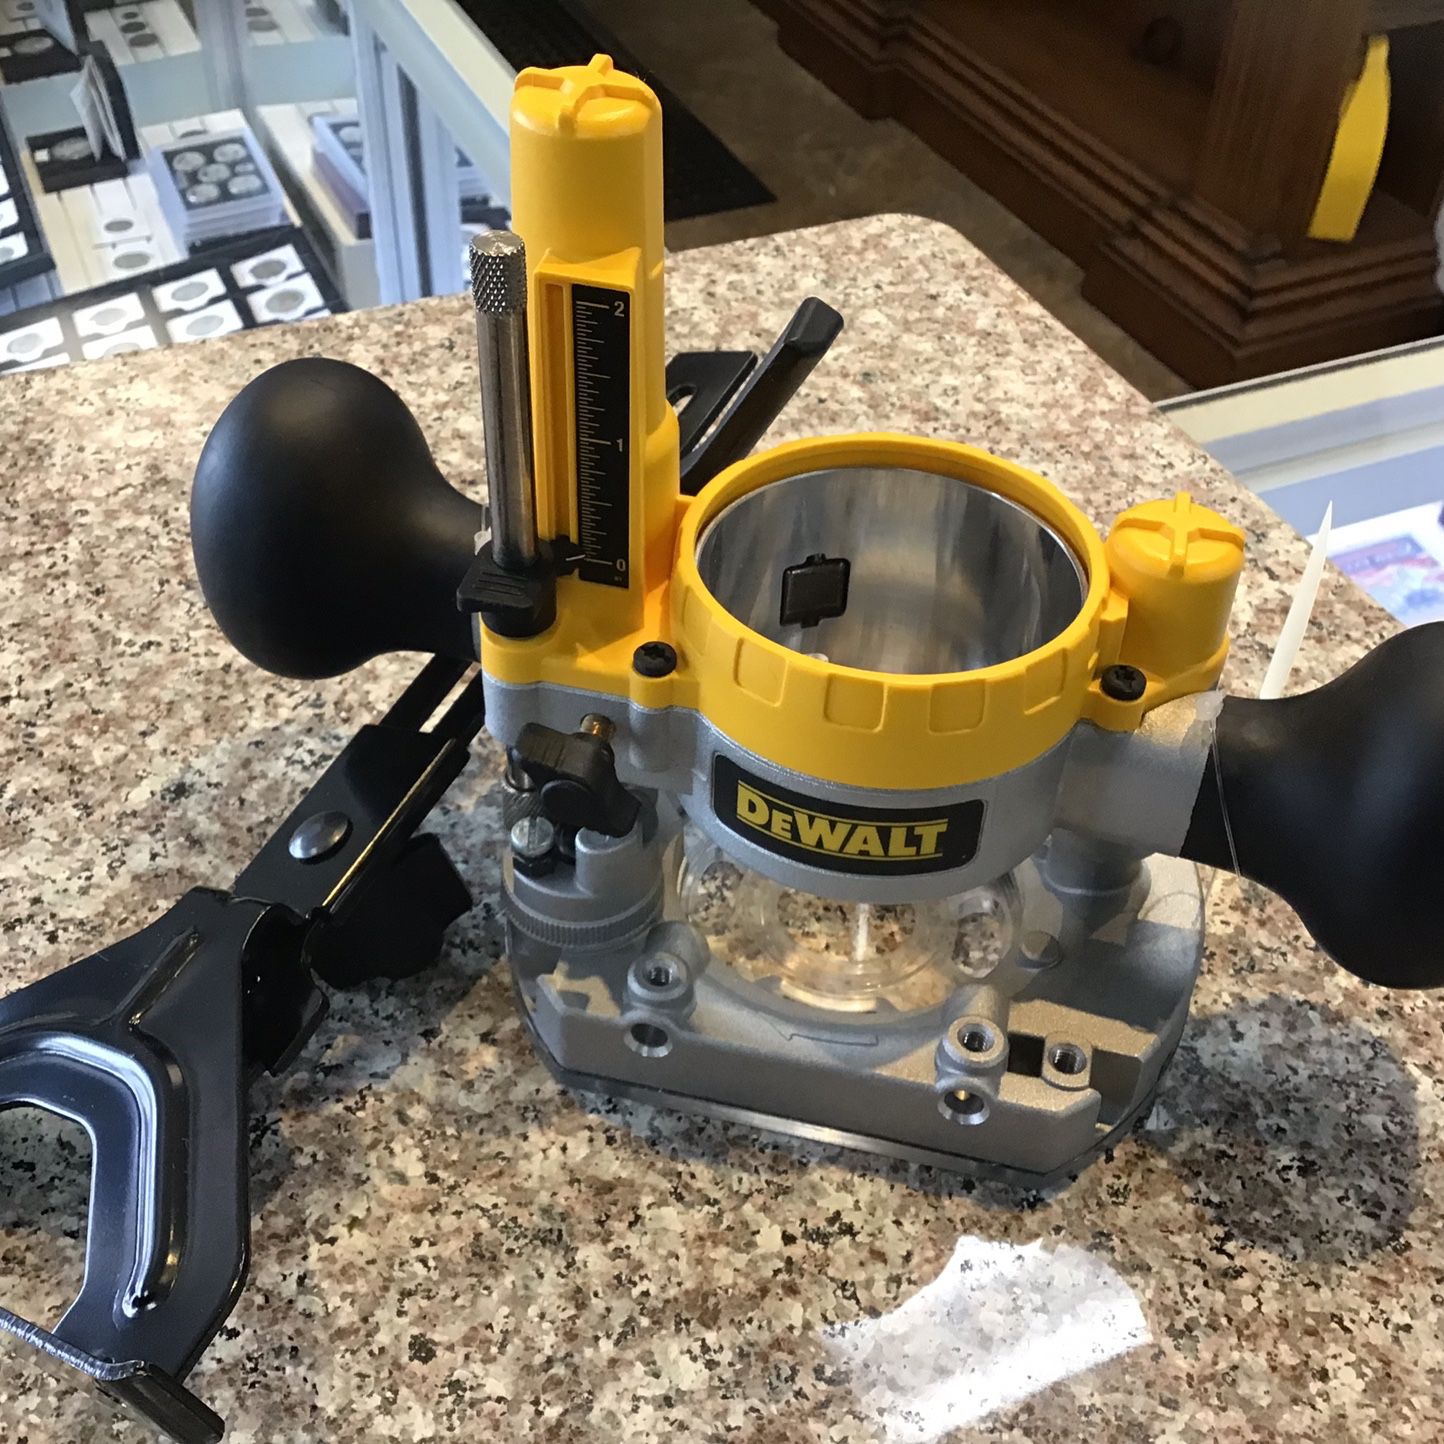 DEWALT Plunge Base for Compact Router for Sale in Willoughby, OH OfferUp